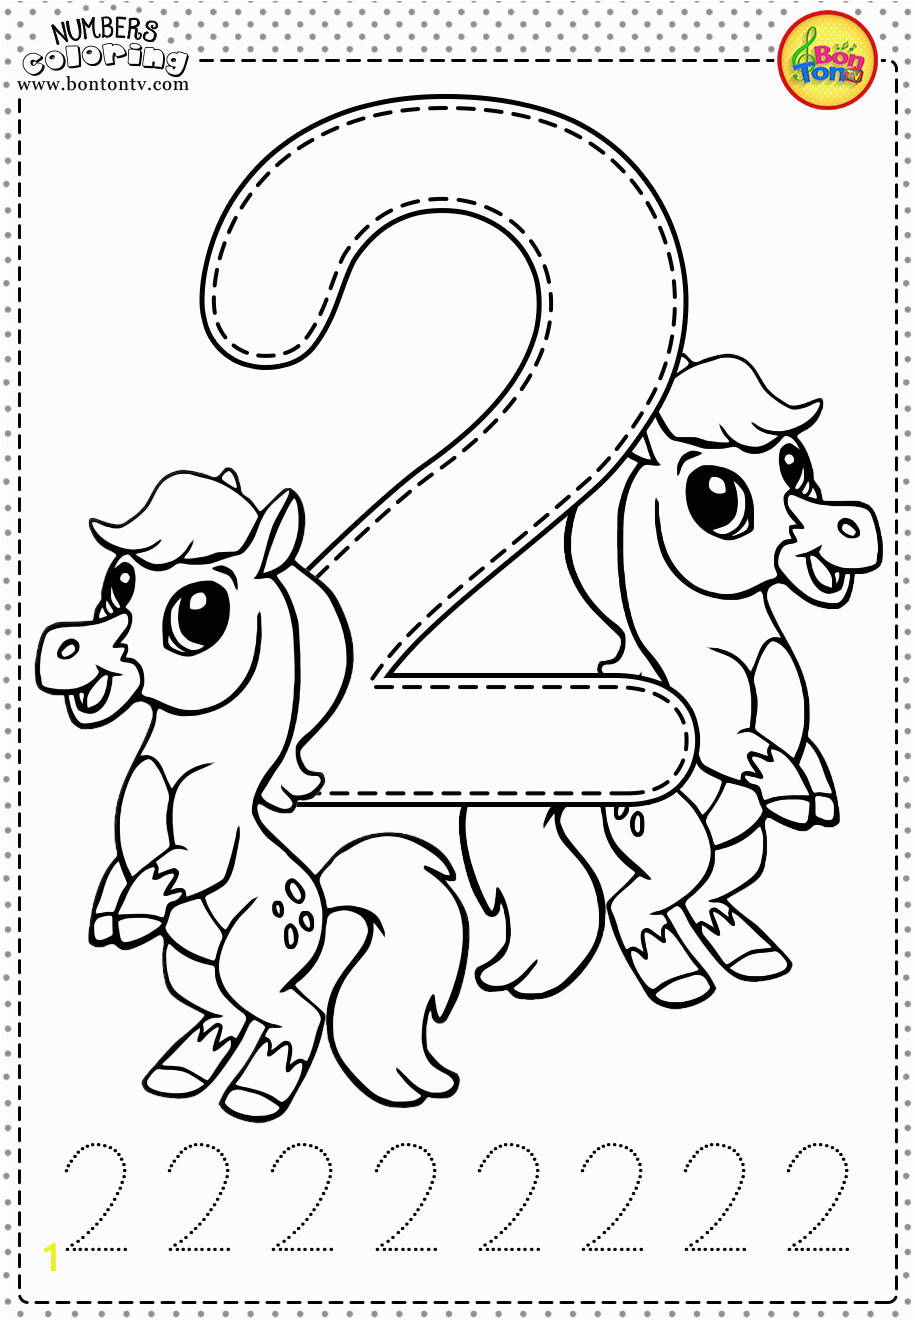 Coloring Pages for College Students | divyajanani.org